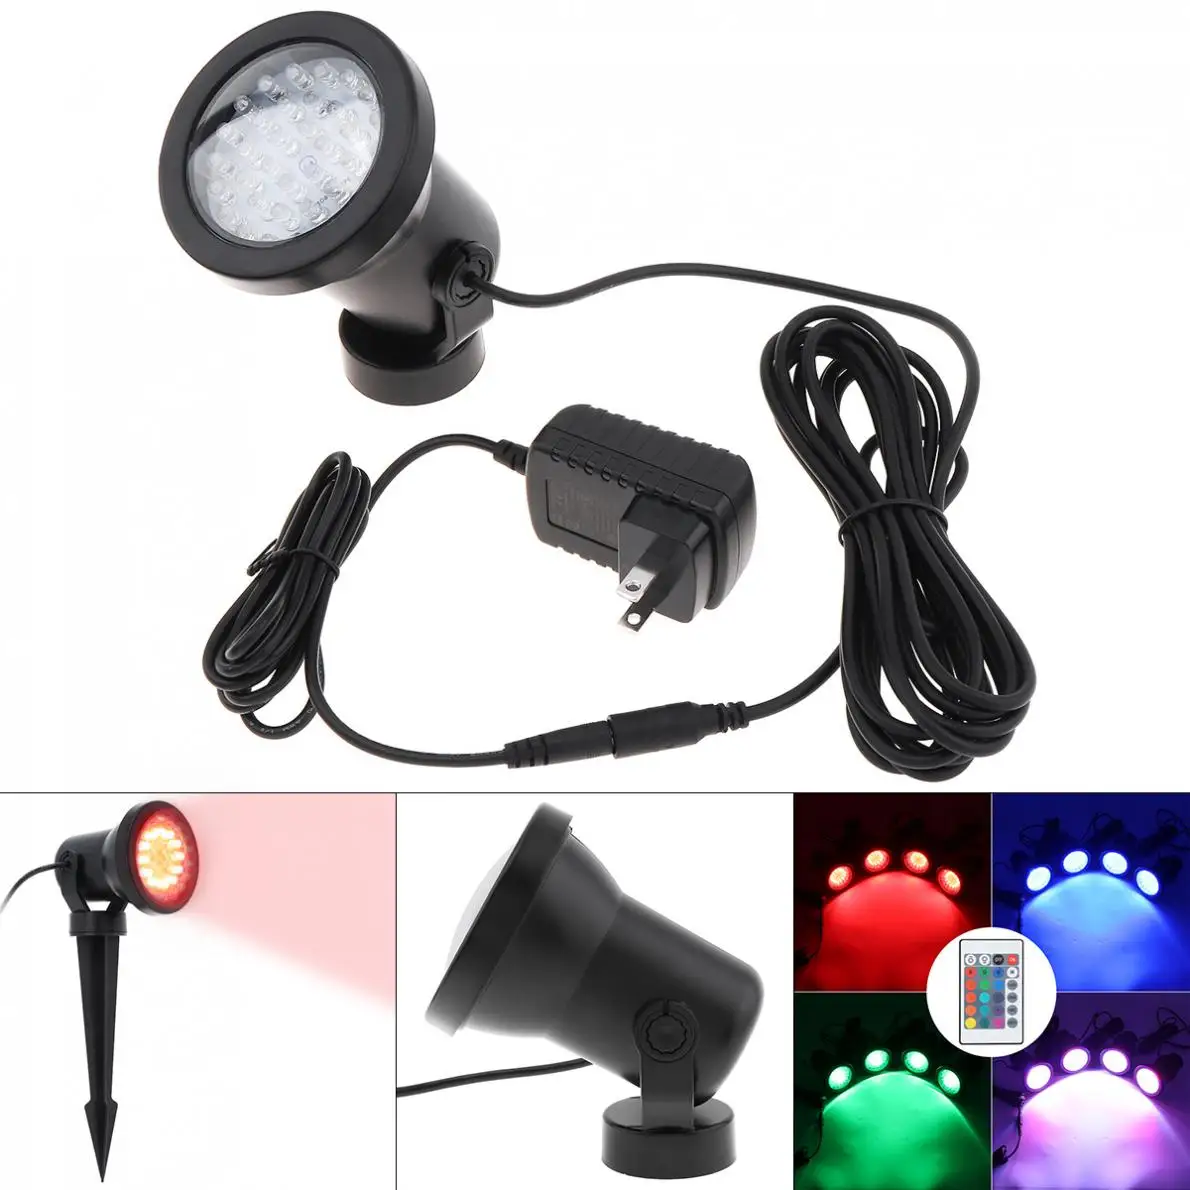 

LED Lawn Light 36 LEDs Waterproof Color Landscaping Spotlights and 16 Colors for Lawn Lamp Waterproof Spotlight